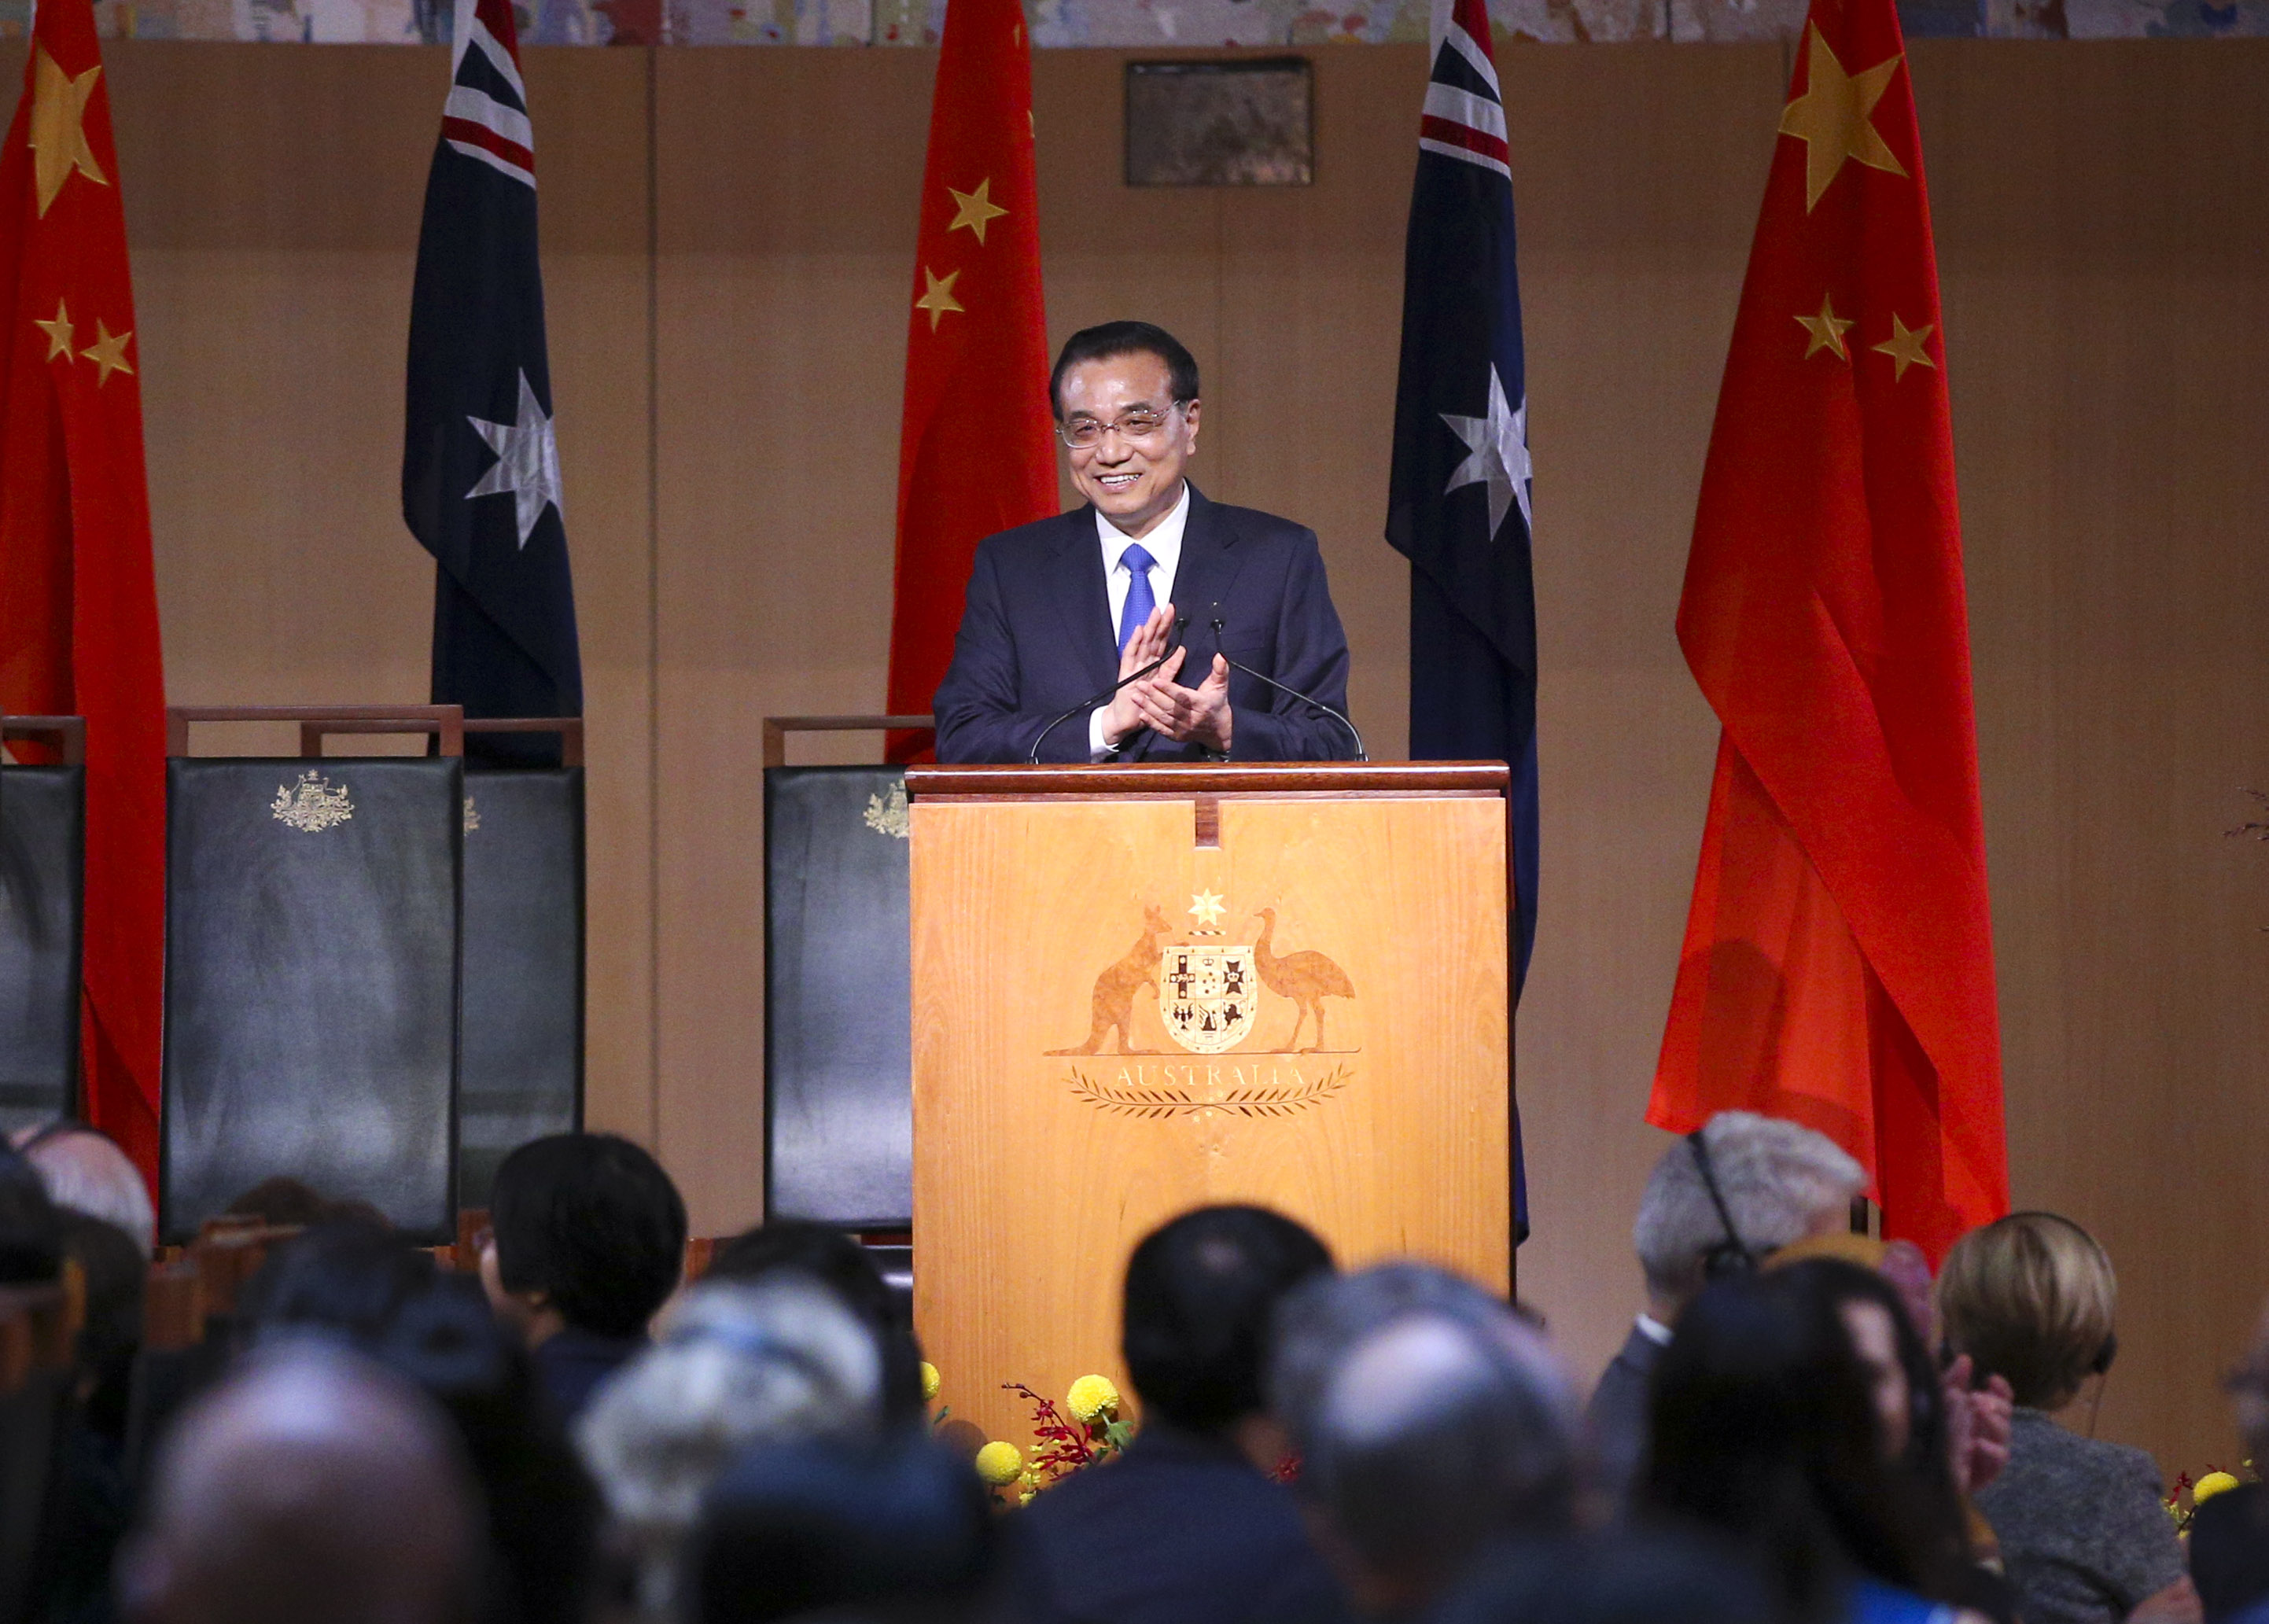 Chinese Premier Li Keqiang delivers a speech during a welcome banquet held by Australian counterpart Malcolm Turnbull in Canberra, Australia, on Thursday, March 23, 2017. Premier Li arrived in the Australian capital of Canberra Wednesday night for an official visit. [Photo: gov.cn]